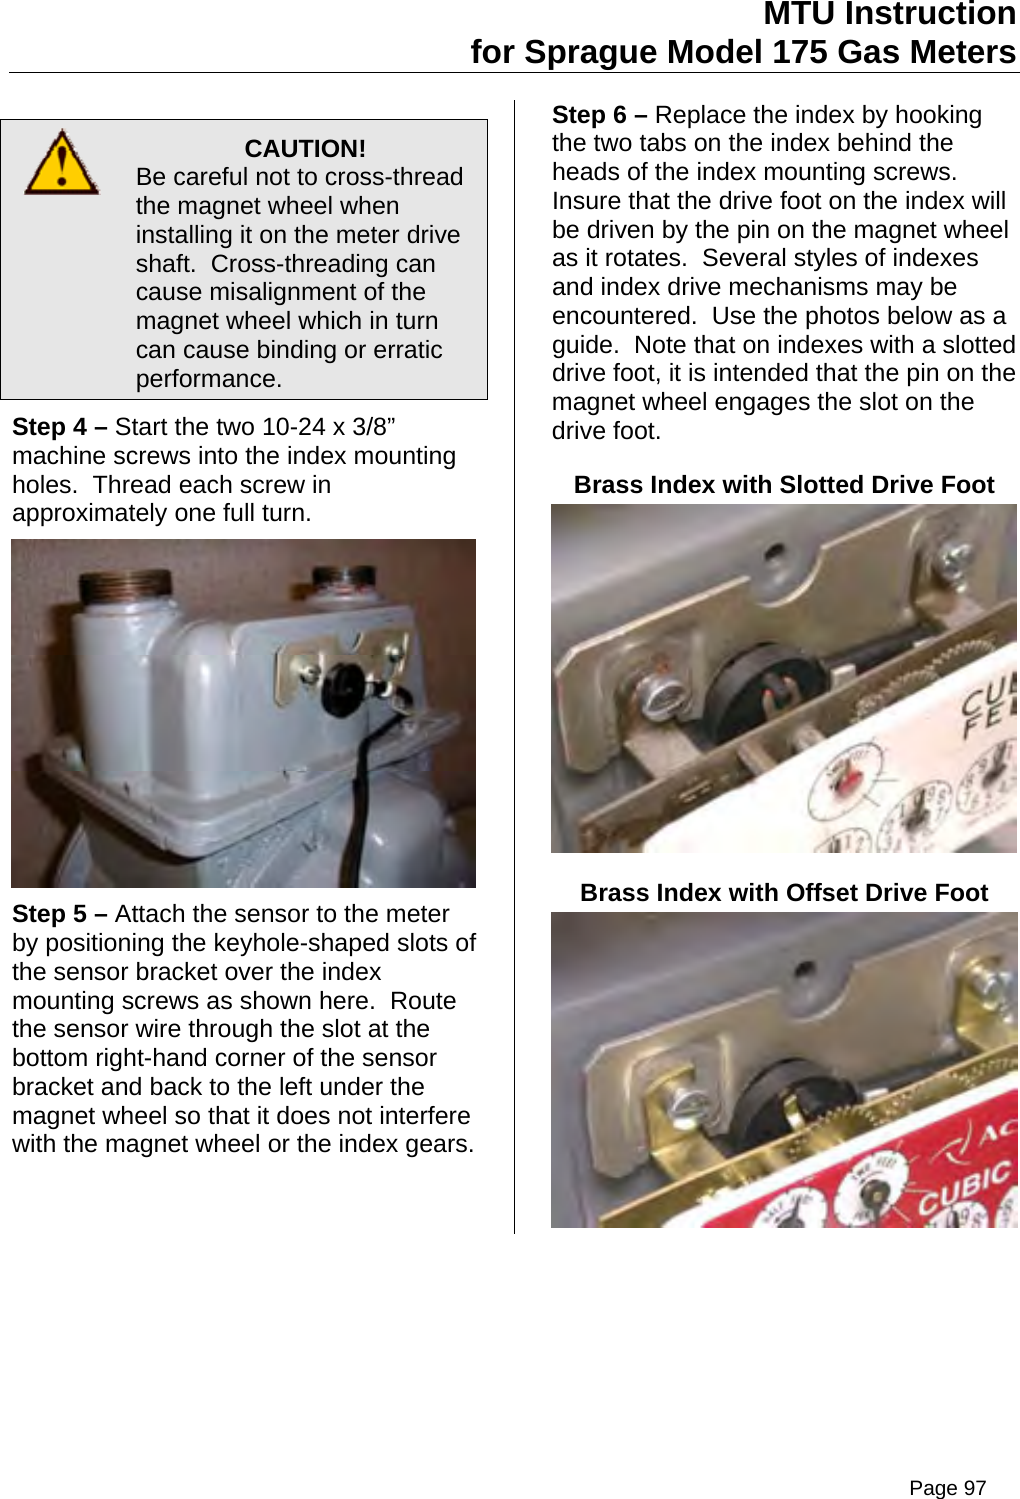 Page 97 of Aclara Technologies 09015 Transmitter for Meter Reading User Manual users manual